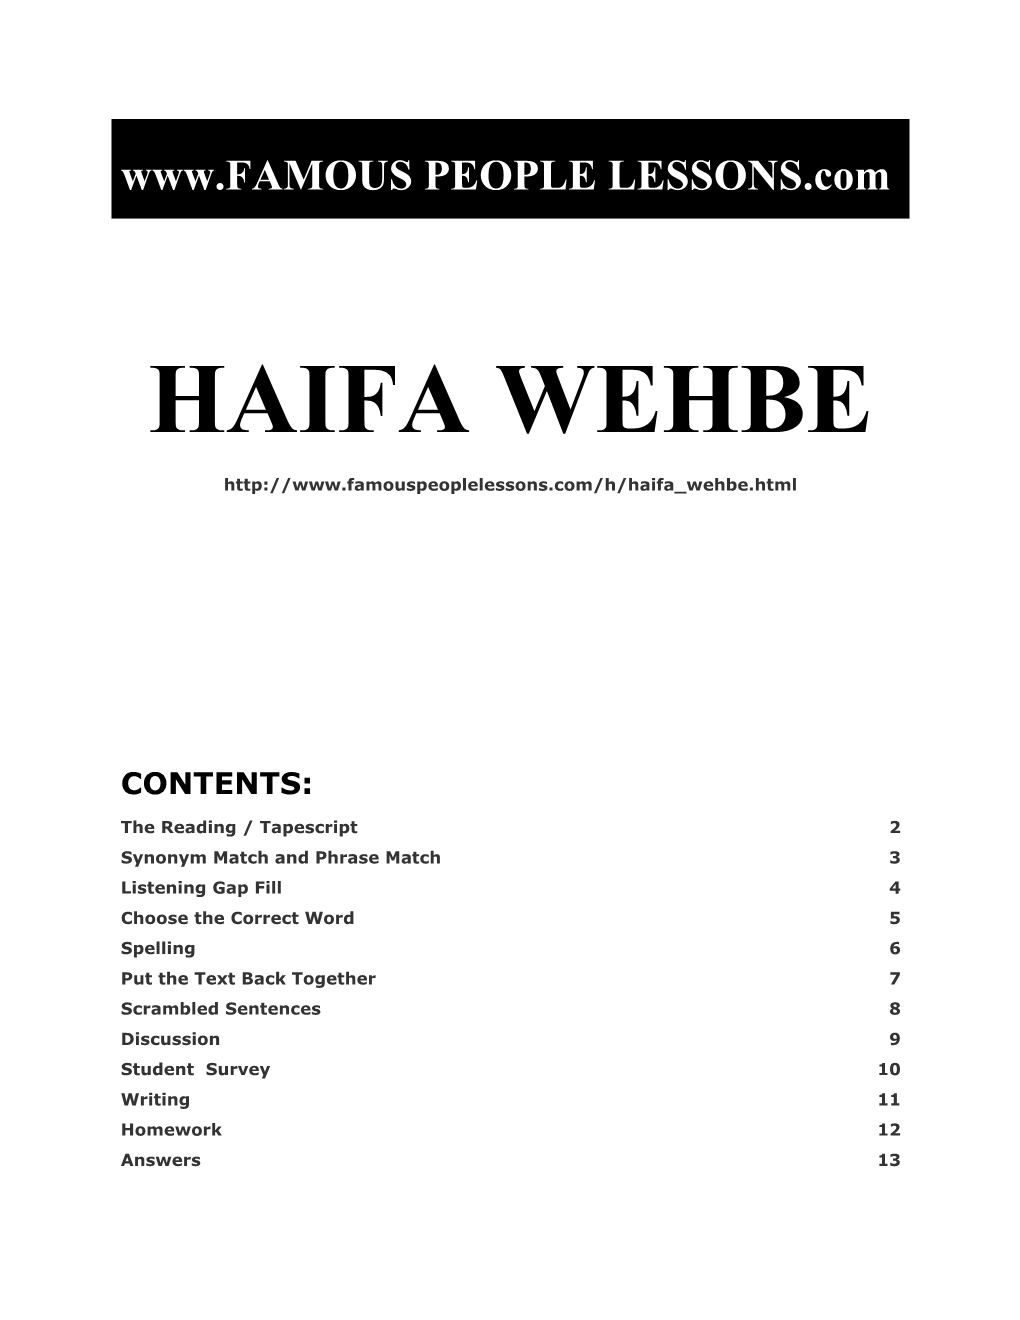 Famous People Lessons - Haifa Wehbe